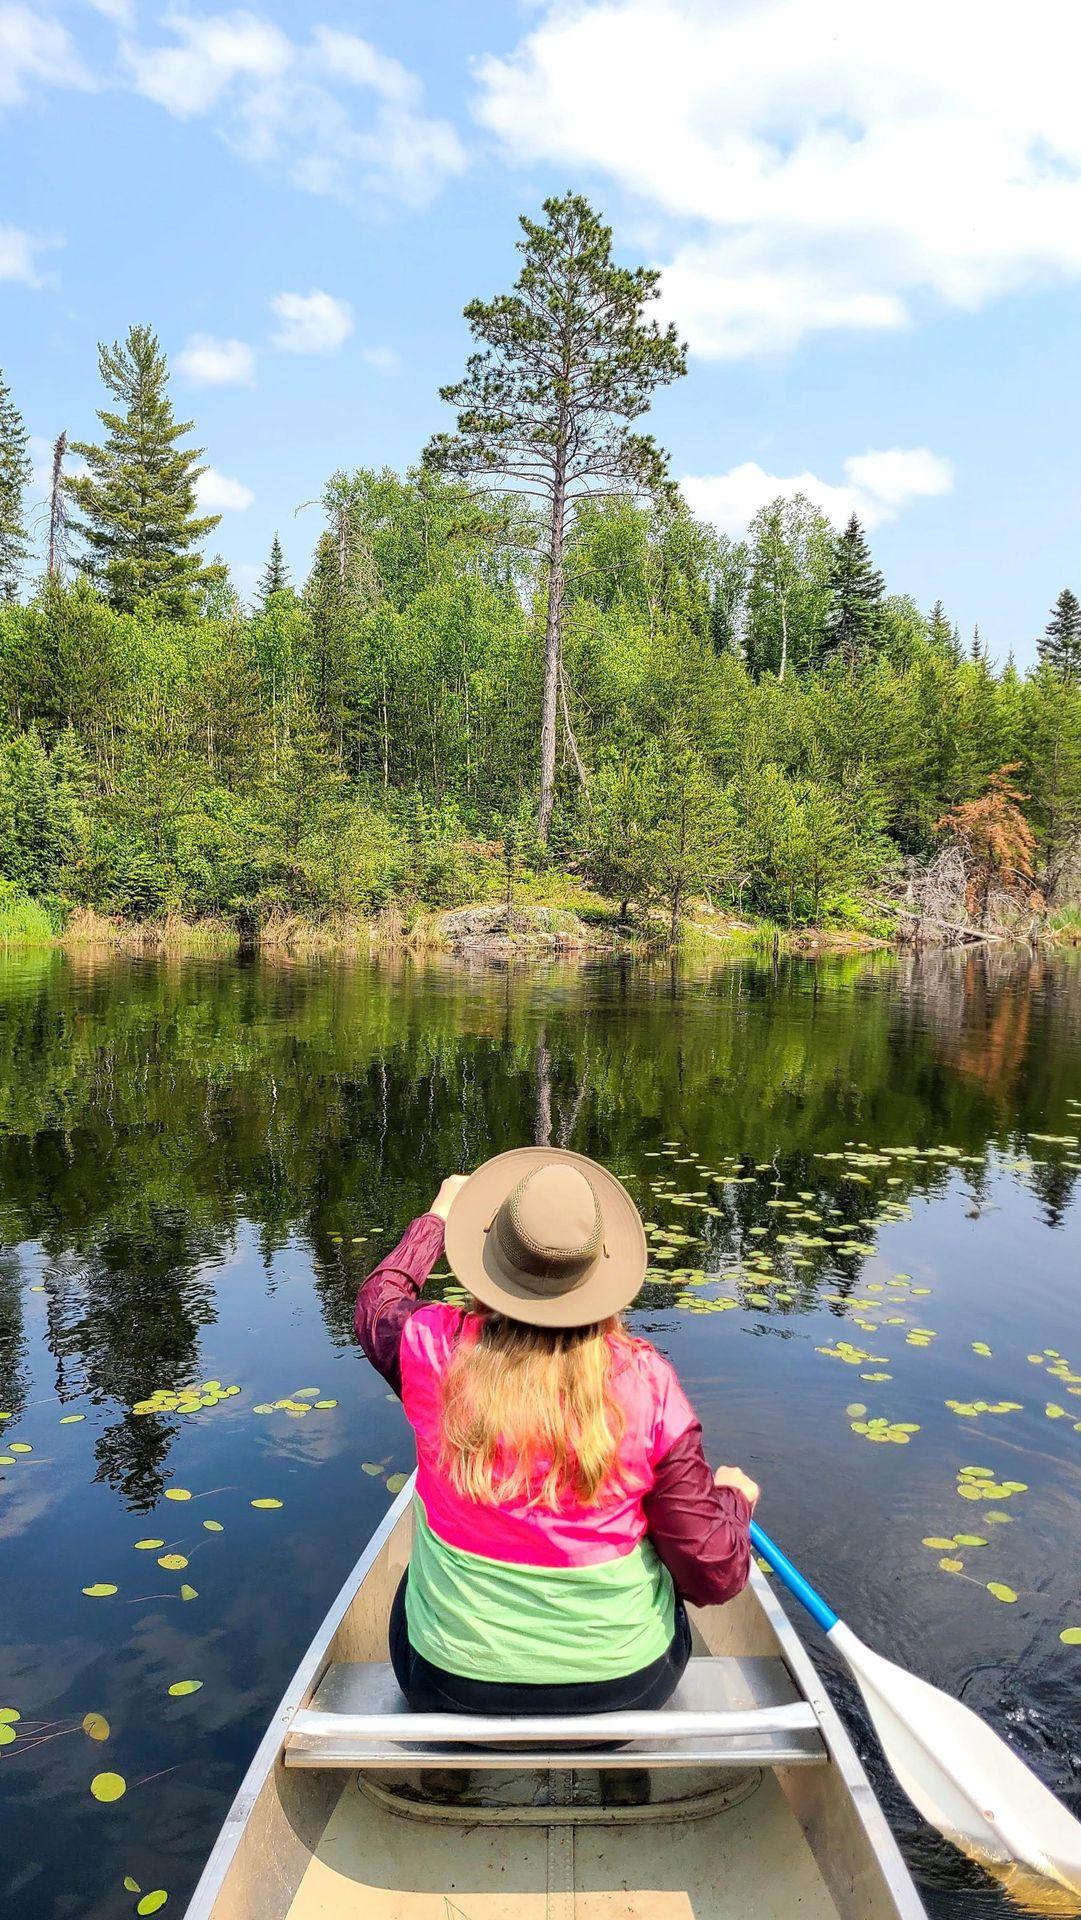 If you prefer peace and quiet when you’re exploring nature, I highly recommend a visit to any of these parks over the summer!